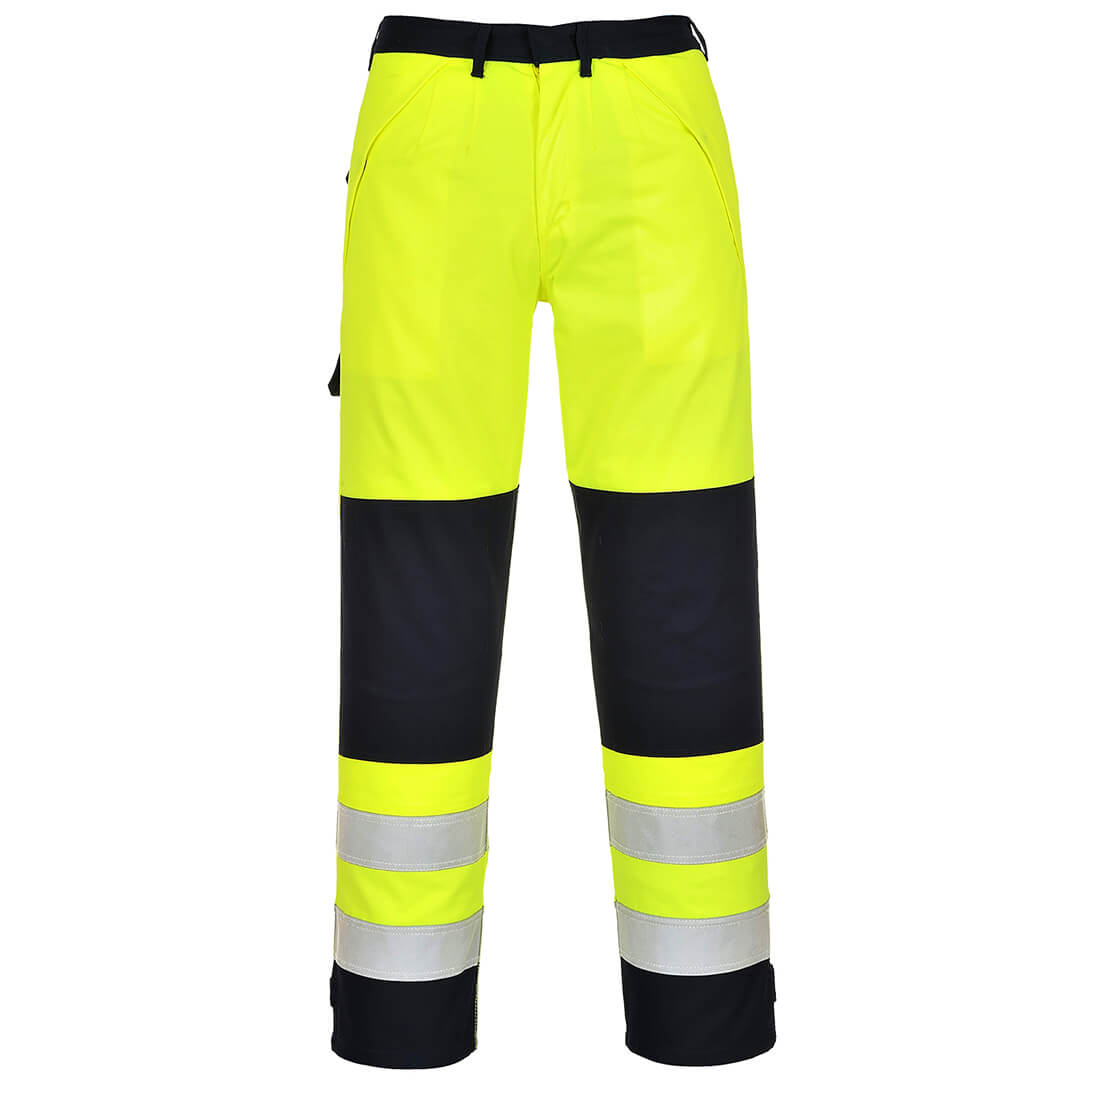 Image of Biz Flame Hi Vis Multi-Norm Flame Resistant Trousers Yellow / Navy 2XL